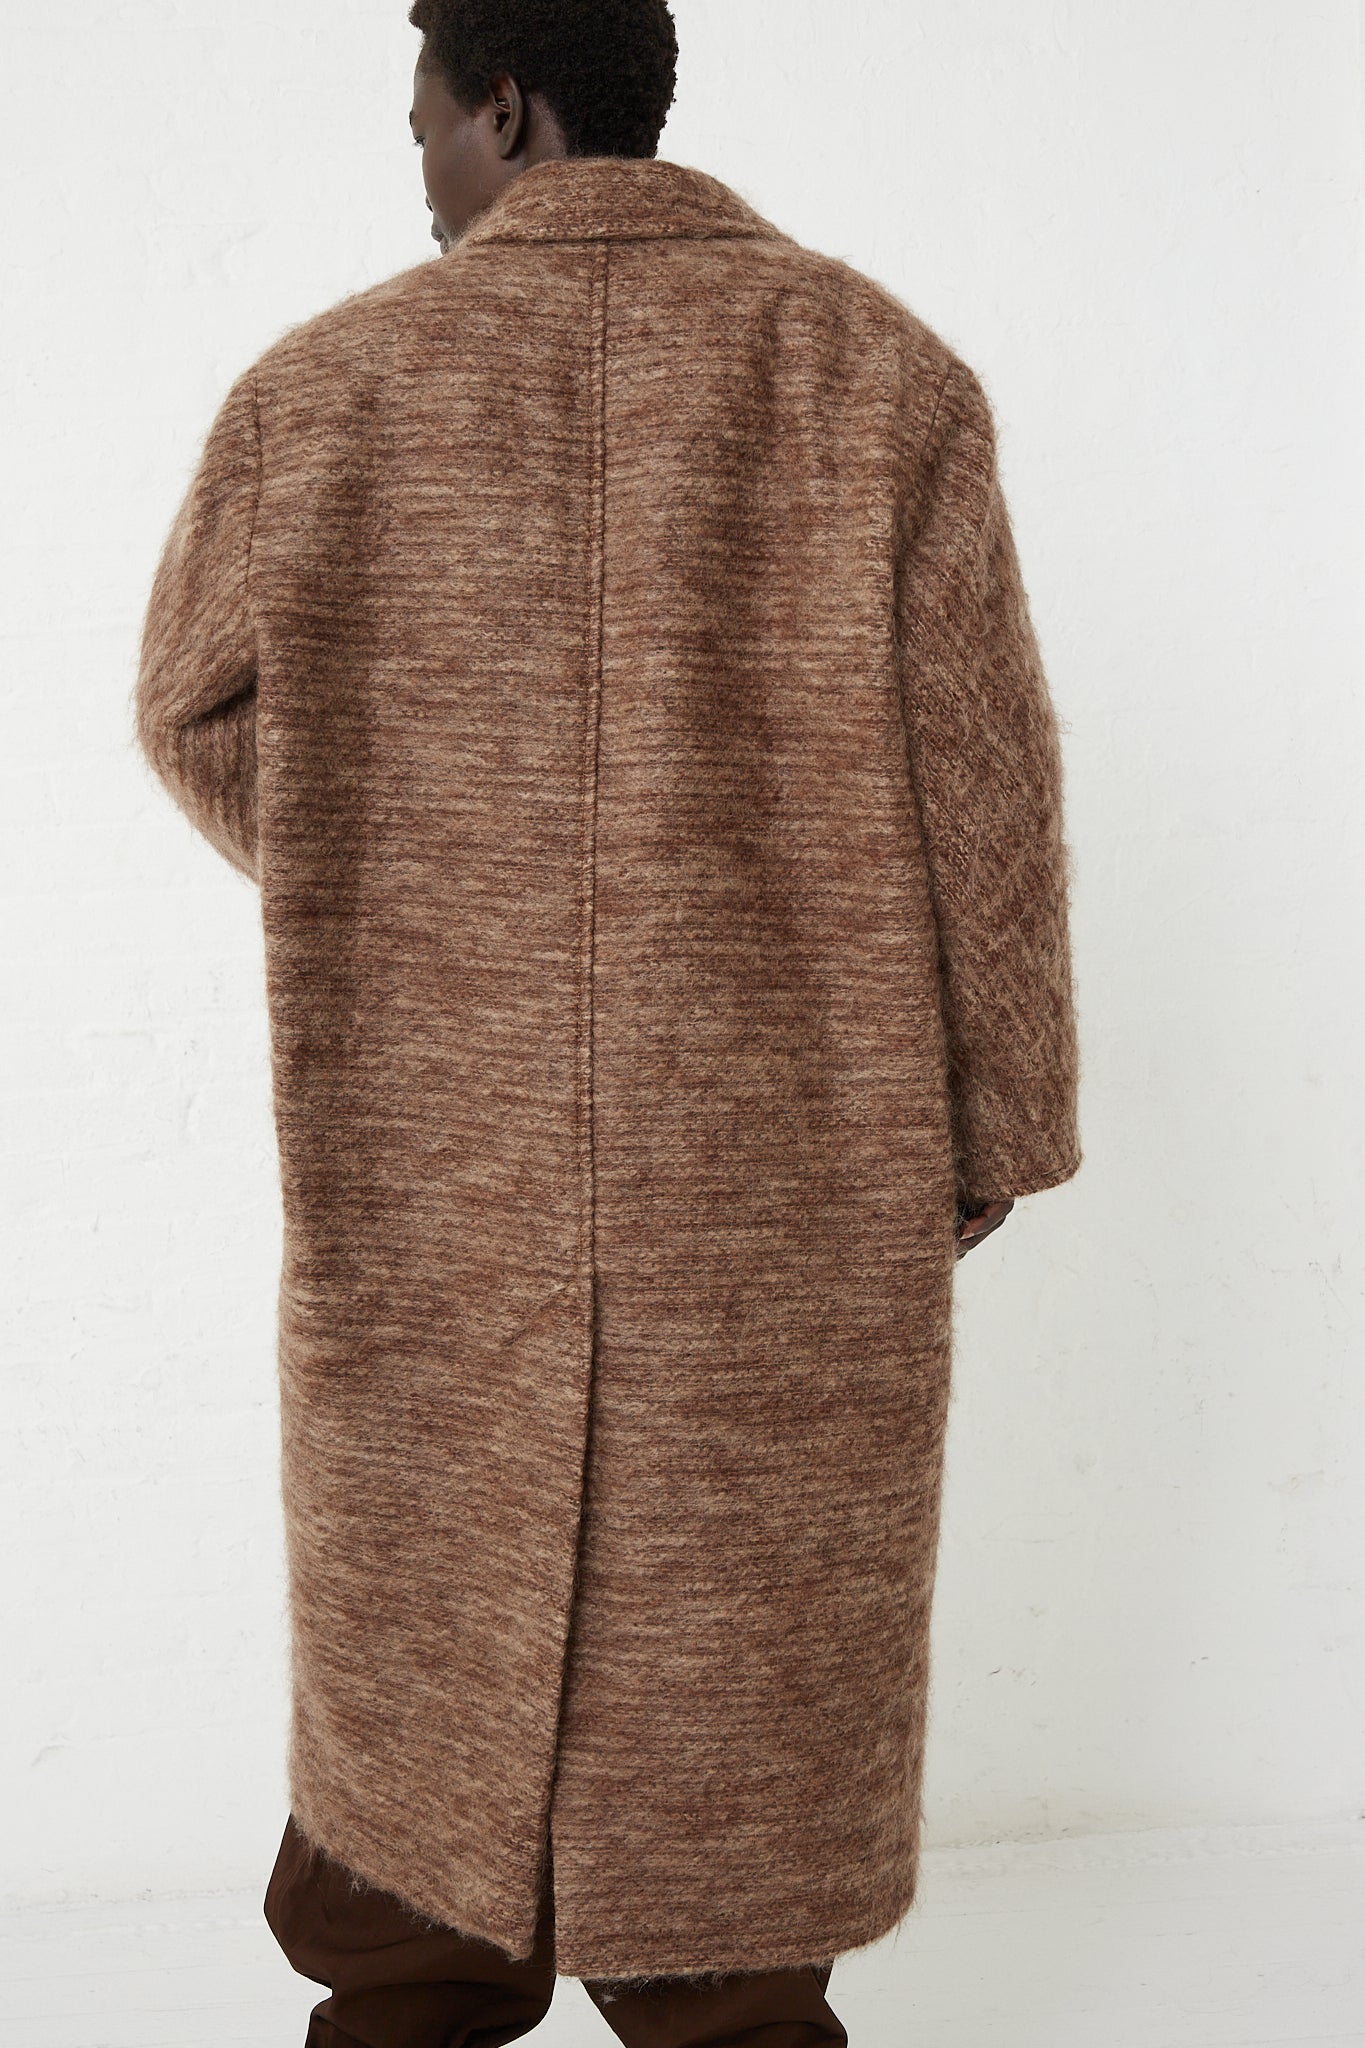 The back of a woman wearing an exclusive Veronique Leroy Wide Shoulder Tailor Coat in Oak made with fine mohair fabric.